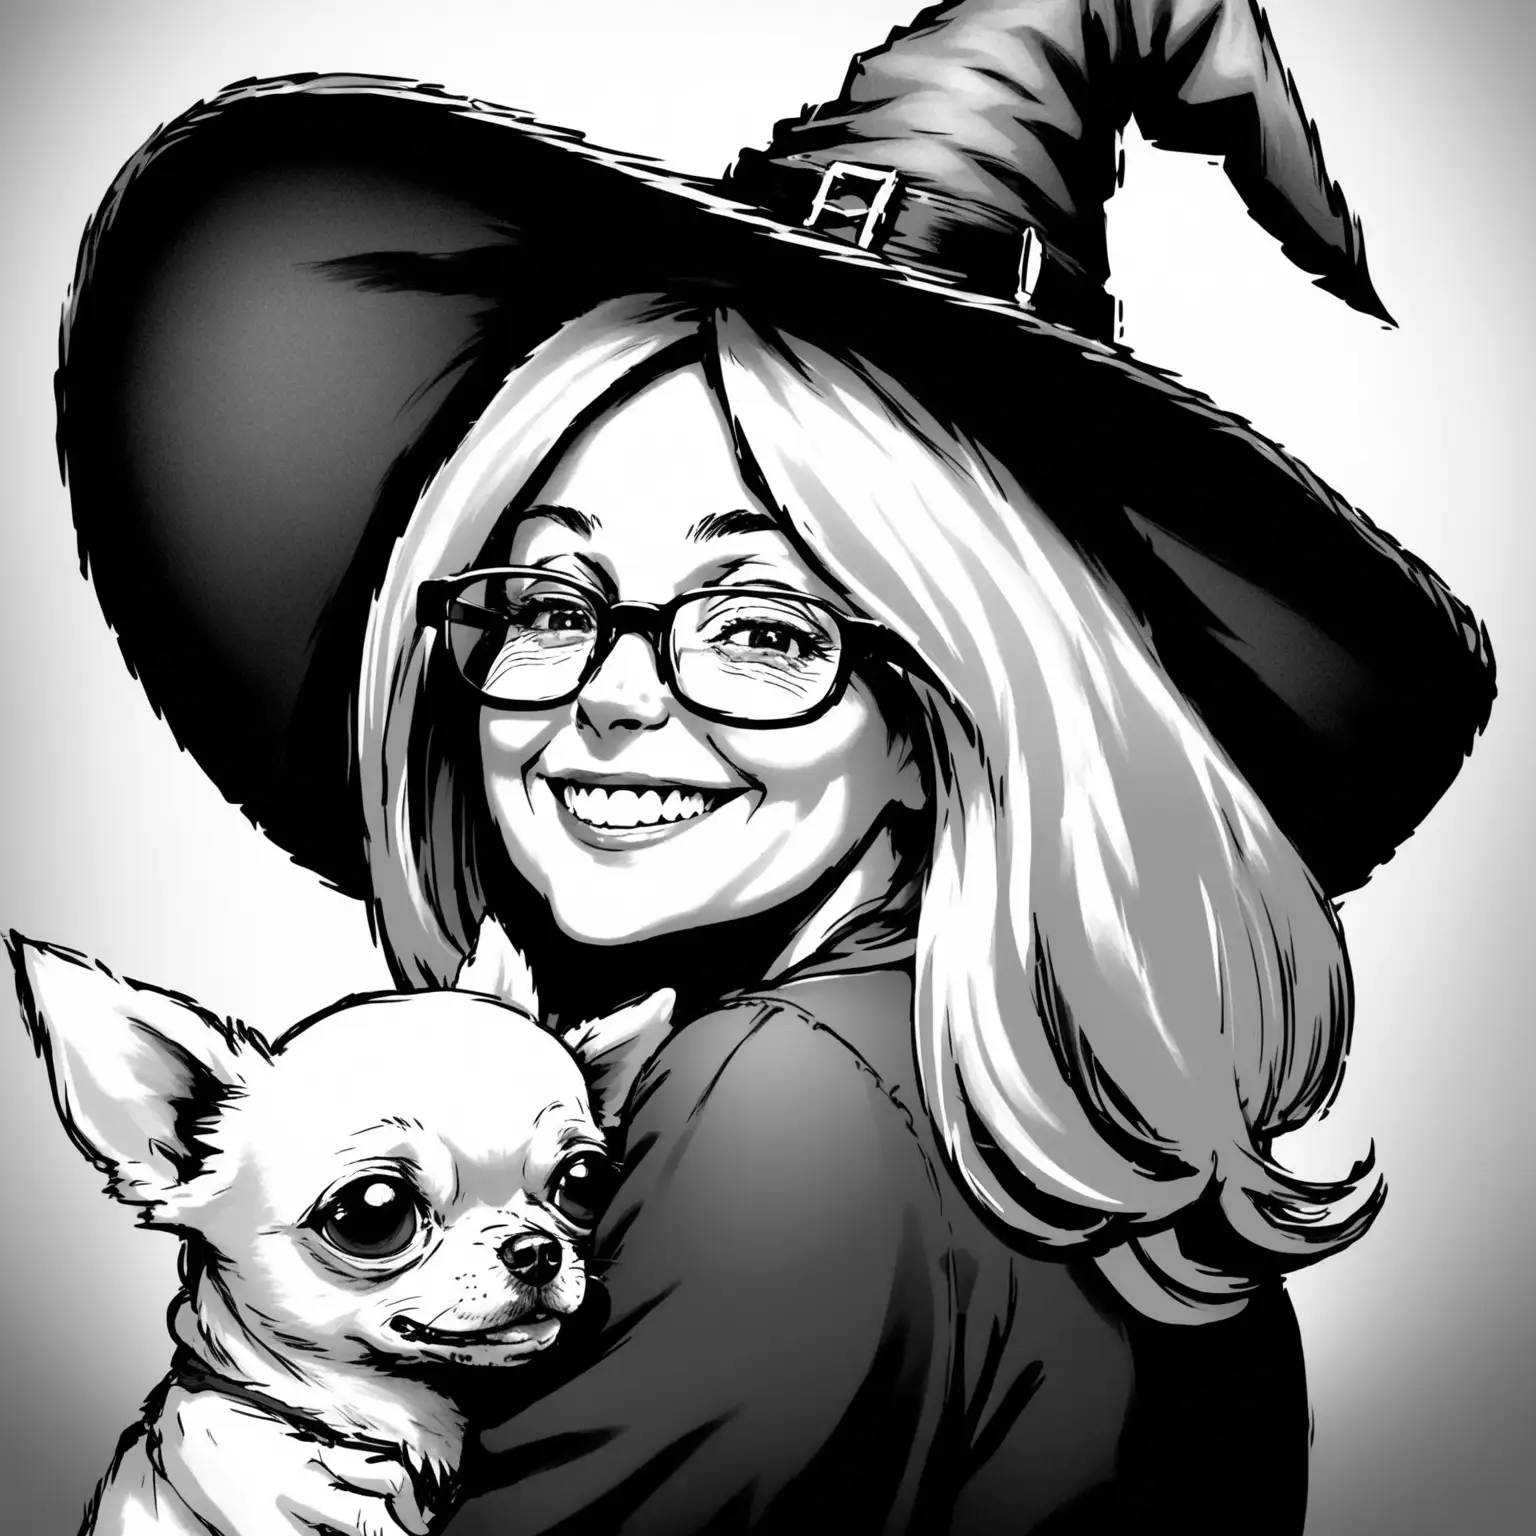 black and white image of the backside of a grinning middle aged woman looking over her shoulder, with shoulder length hair and wearing a witch hat and glasses and holding a chihuahua dog